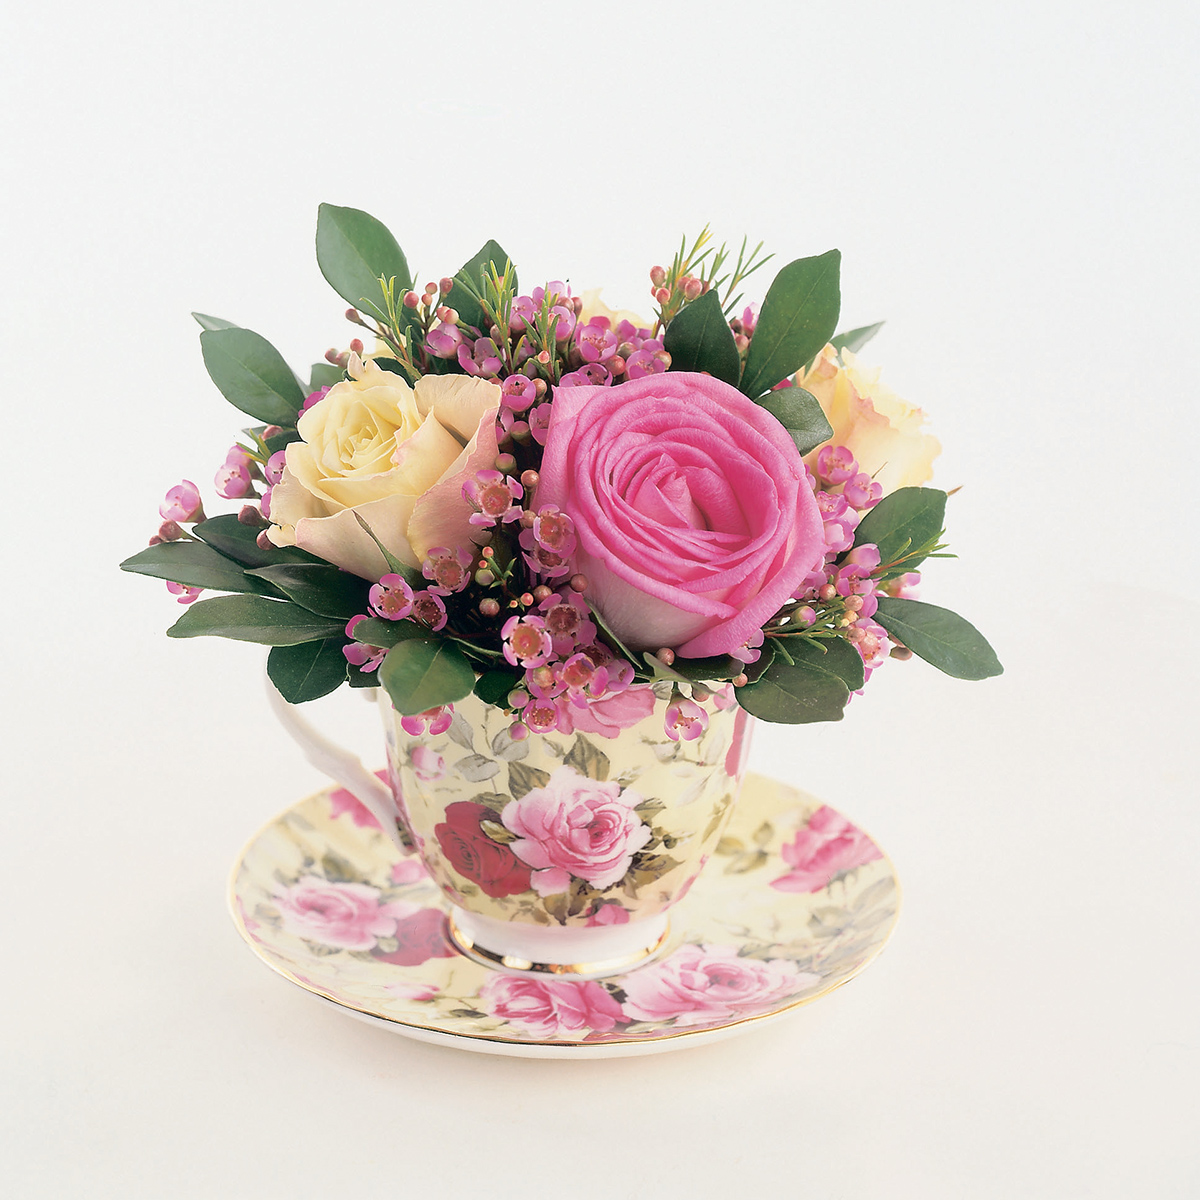 Stephen Smith for Florists' Review